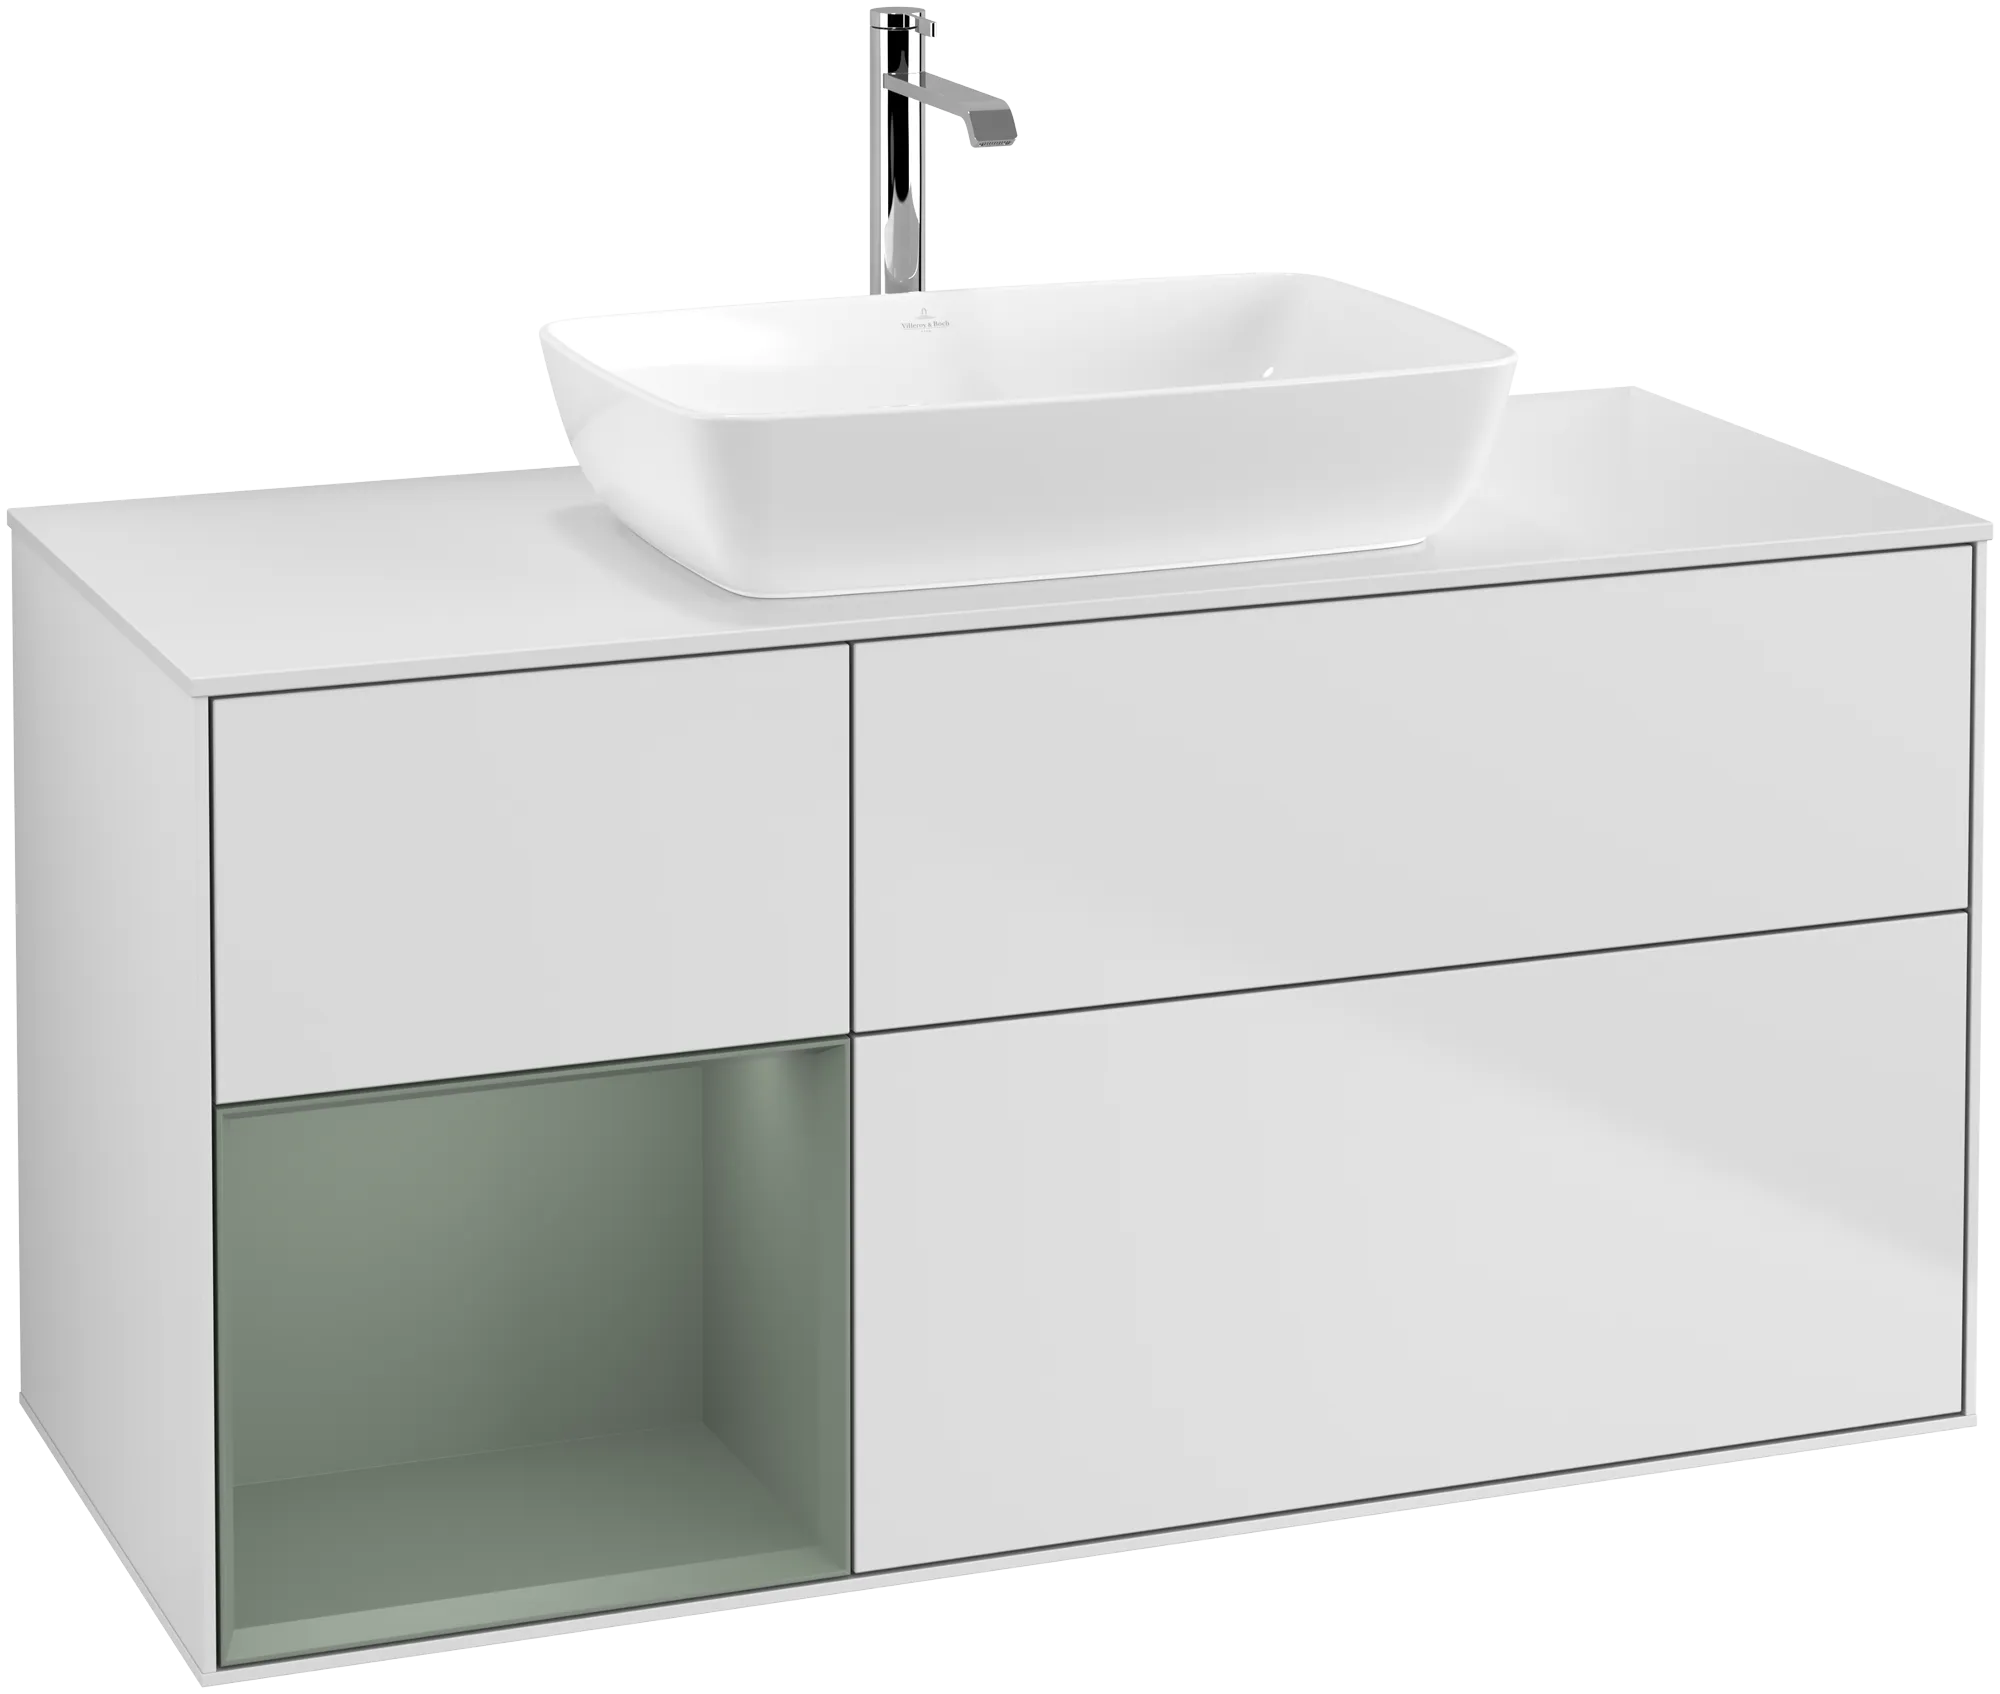 Obrázek VILLEROY BOCH Finion Vanity unit, with lighting, 3 pull-out compartments, 1200 x 603 x 501 mm, White Matt Lacquer / Olive Matt Lacquer / Glass White Matt #G821GMMT